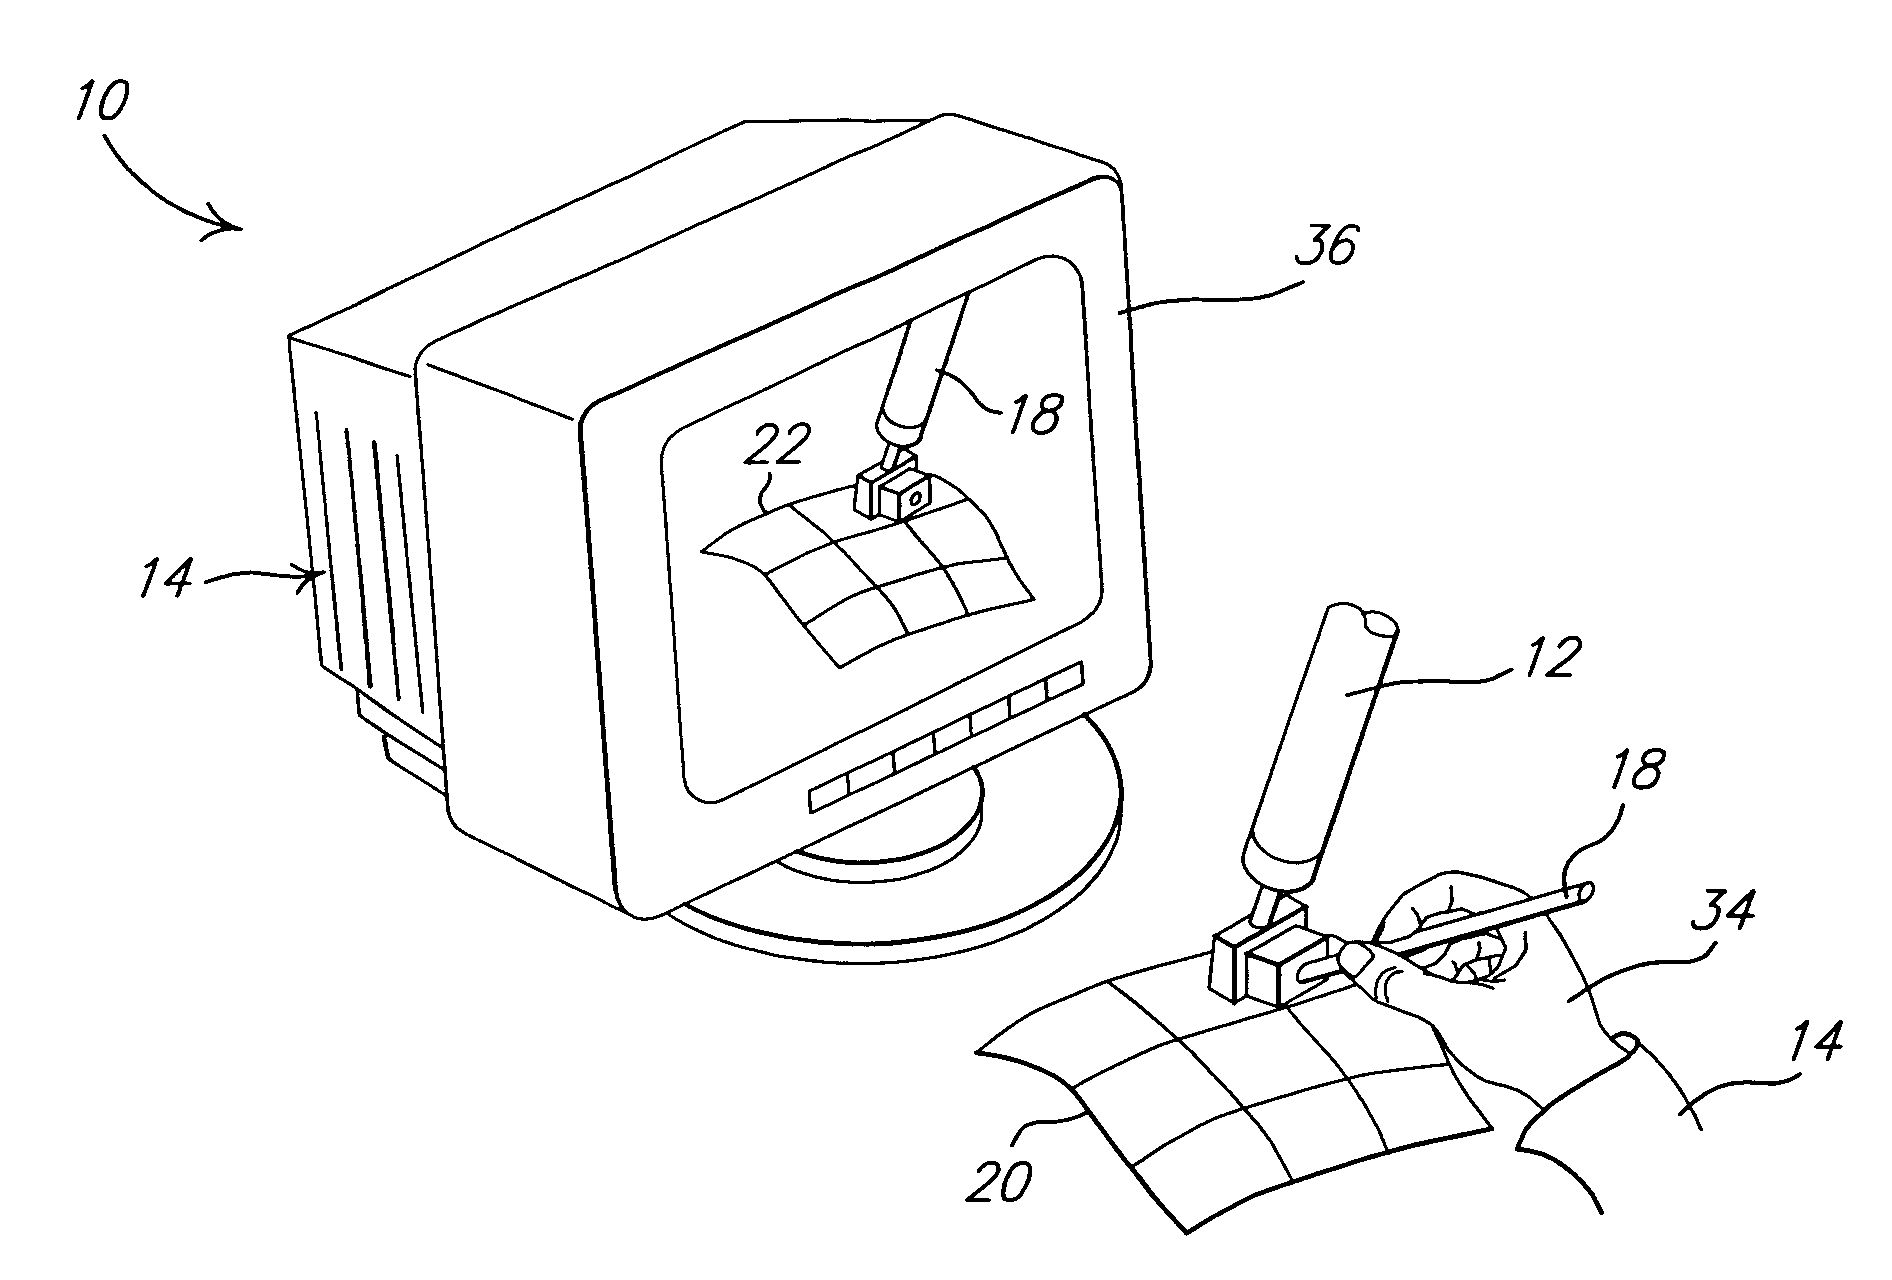 System and method of interactive evaluation of a geometric model